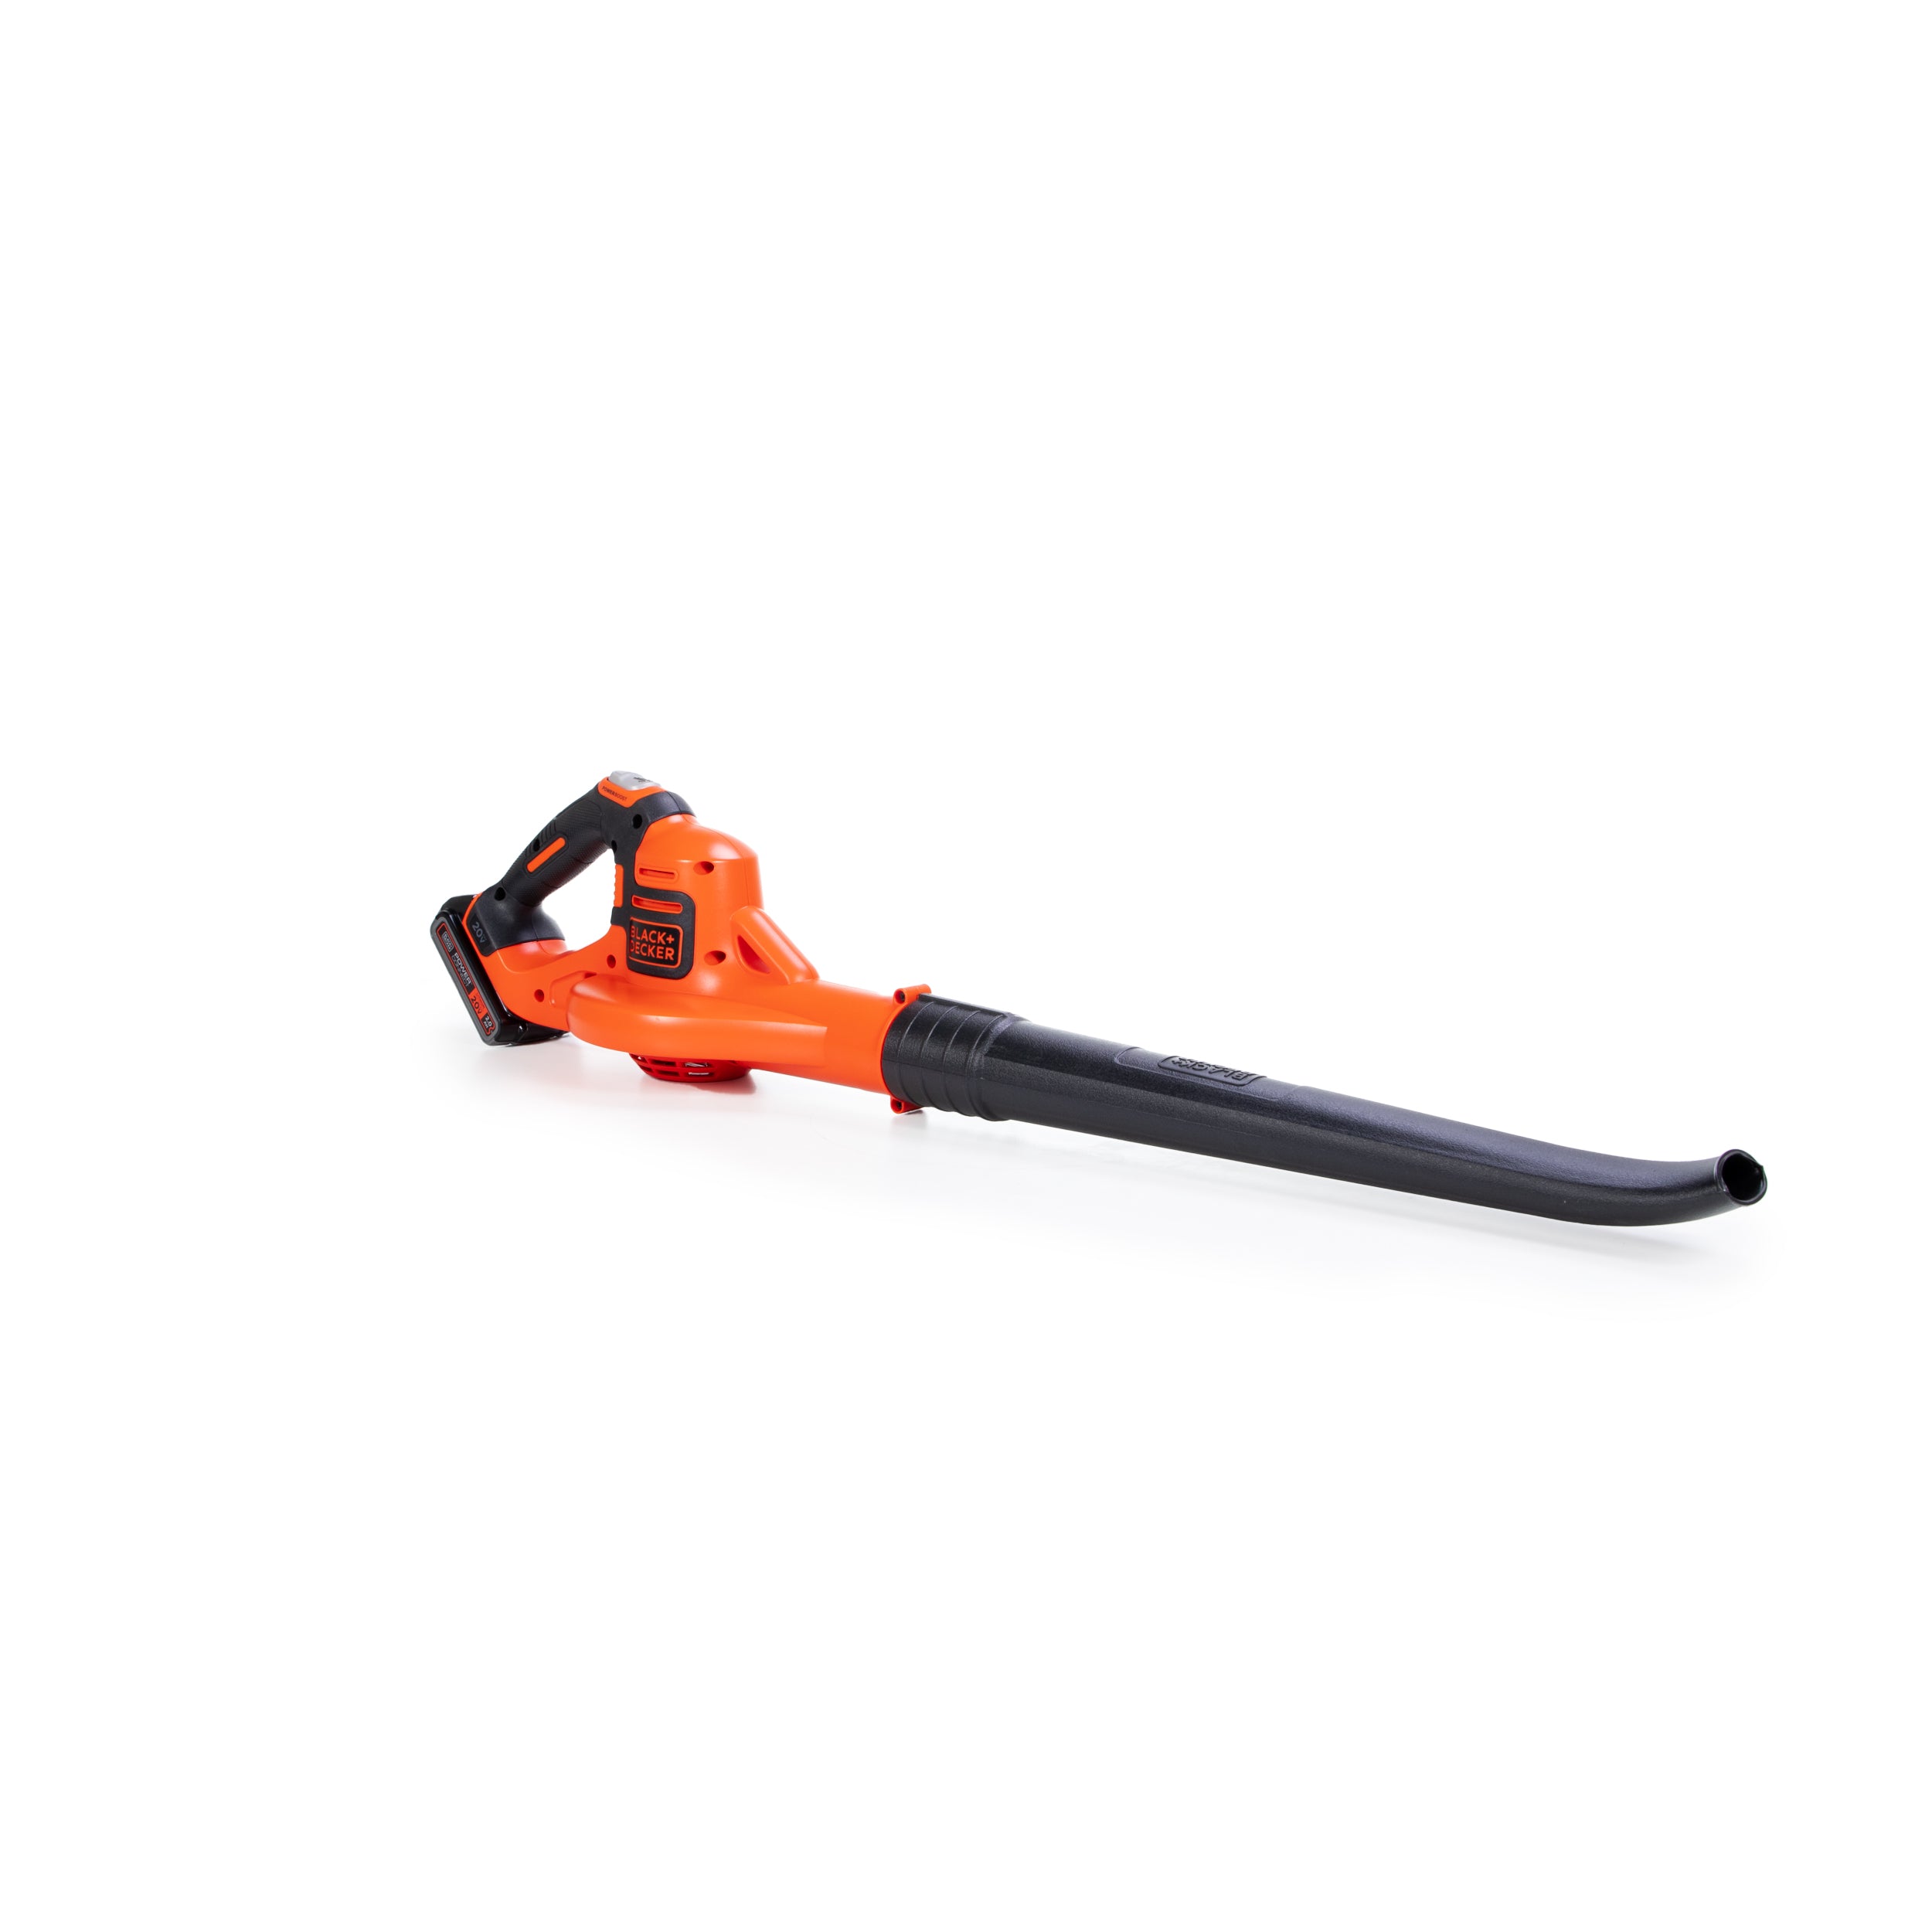 20V Max* Cordless Sweeper With Power Boost